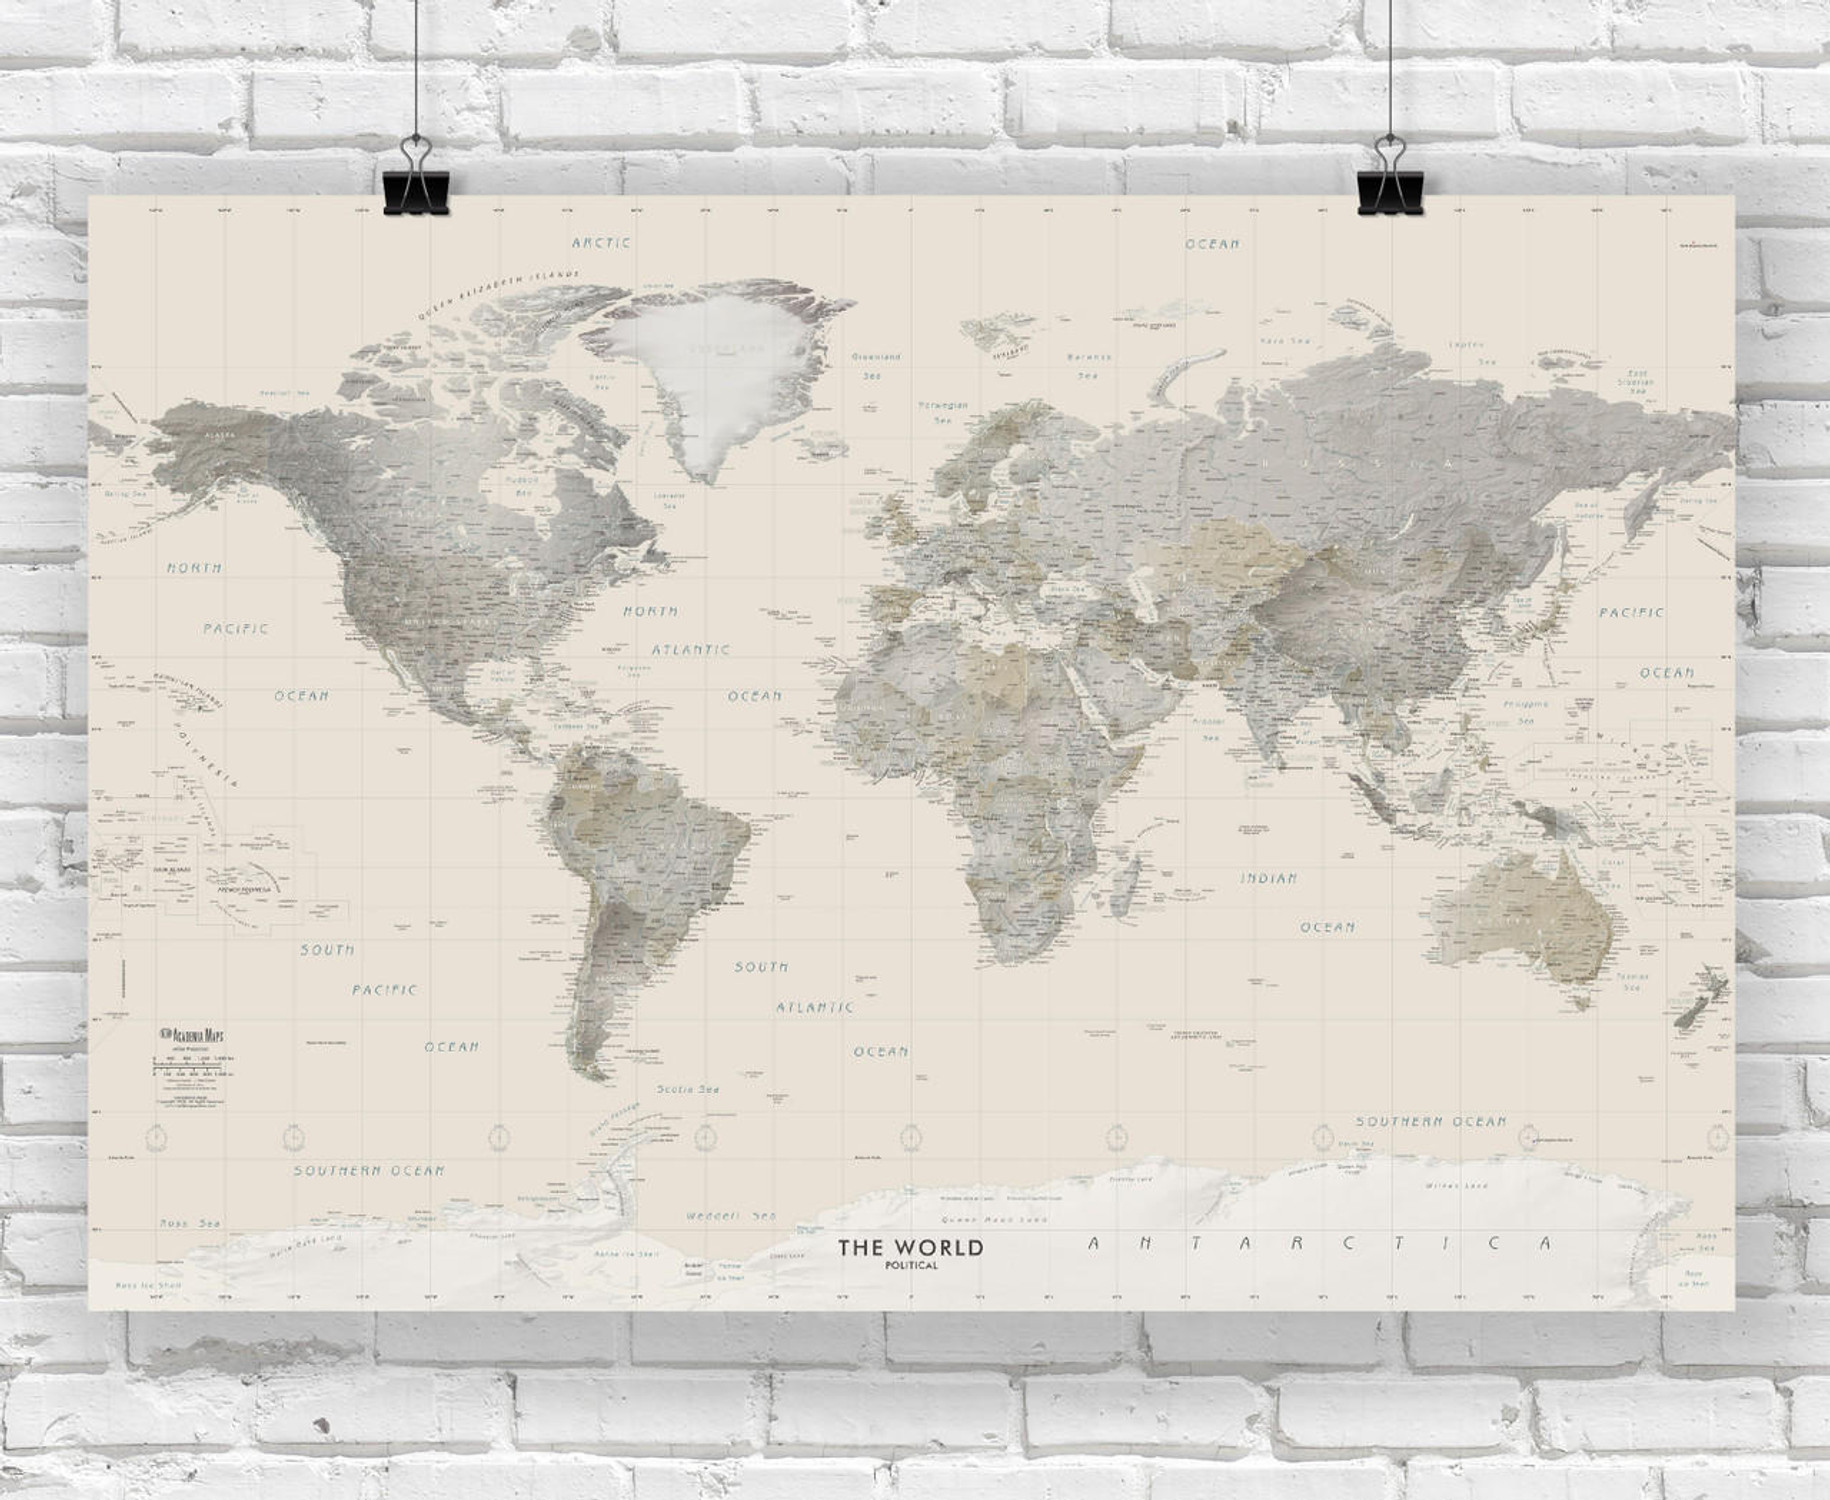 Neutral Tones World Political Wall Map, image 1, World Maps Online